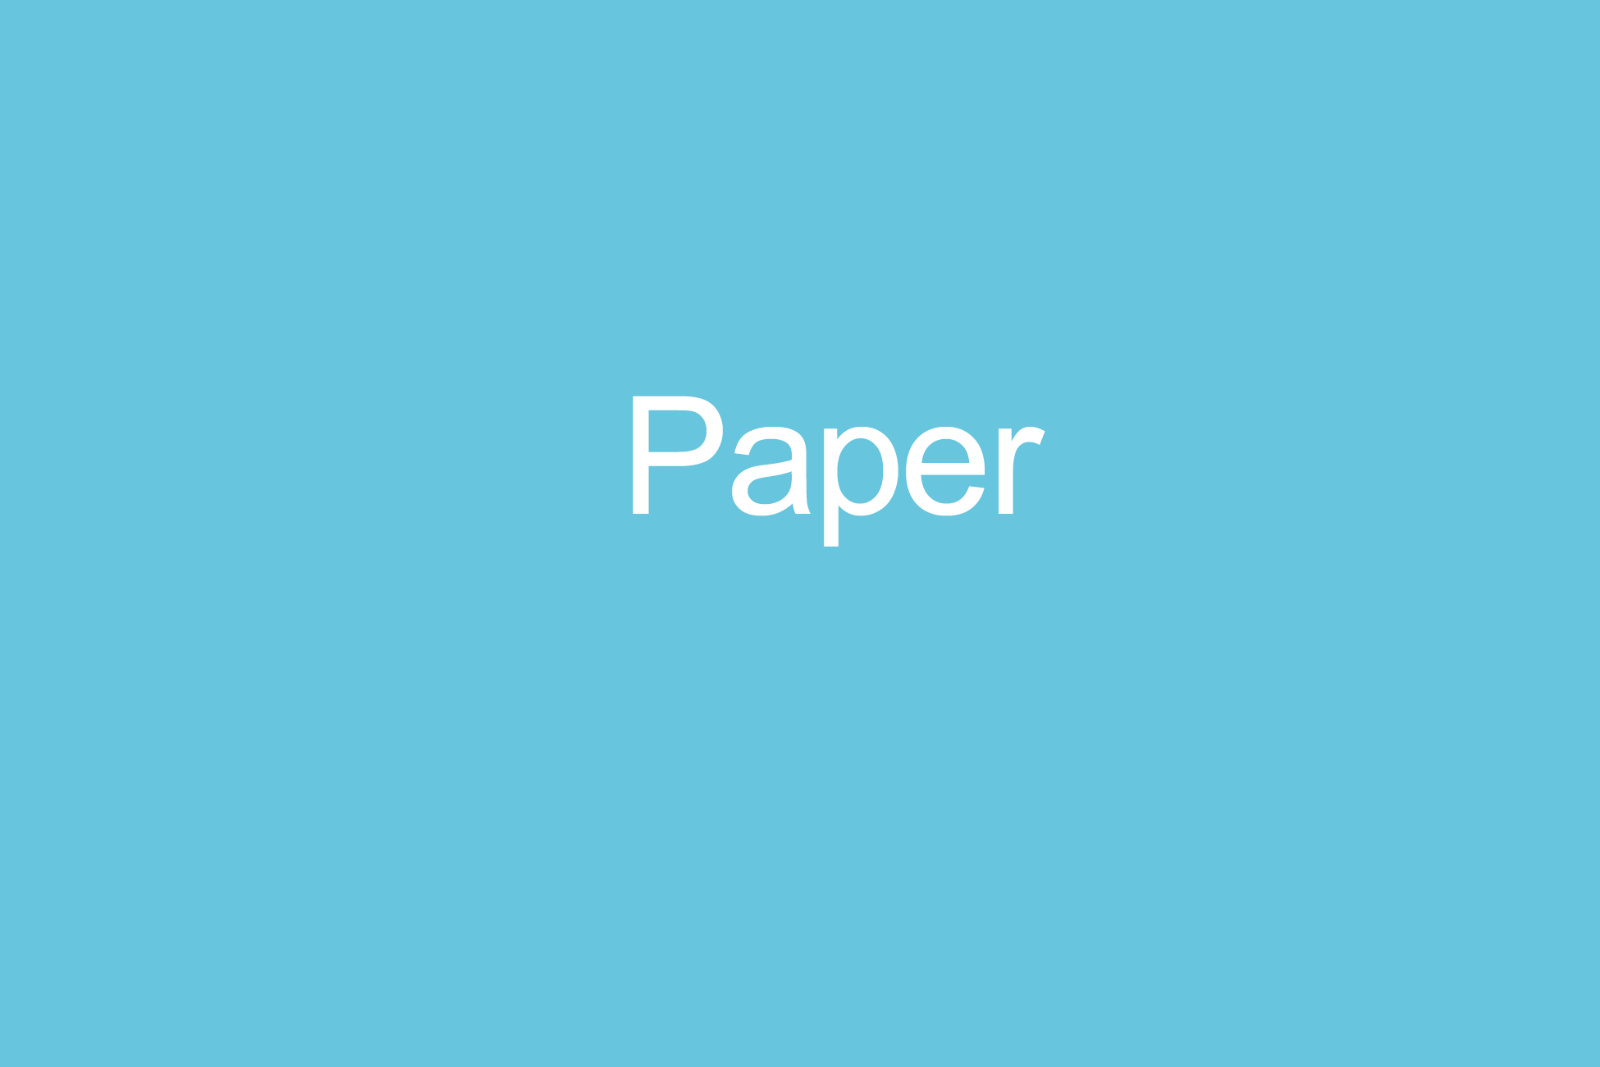 We process creped and smooth paper for a wide variety of applications: Hygiene papers e.g. kitchen rolls, paper napkins, etc. Medical applications e.g. sterilization paper, dental paper, doctor's rolls, etc. Paper for food-related applications, e.g. coffee filters, sandwich paper, baking paper, etc.